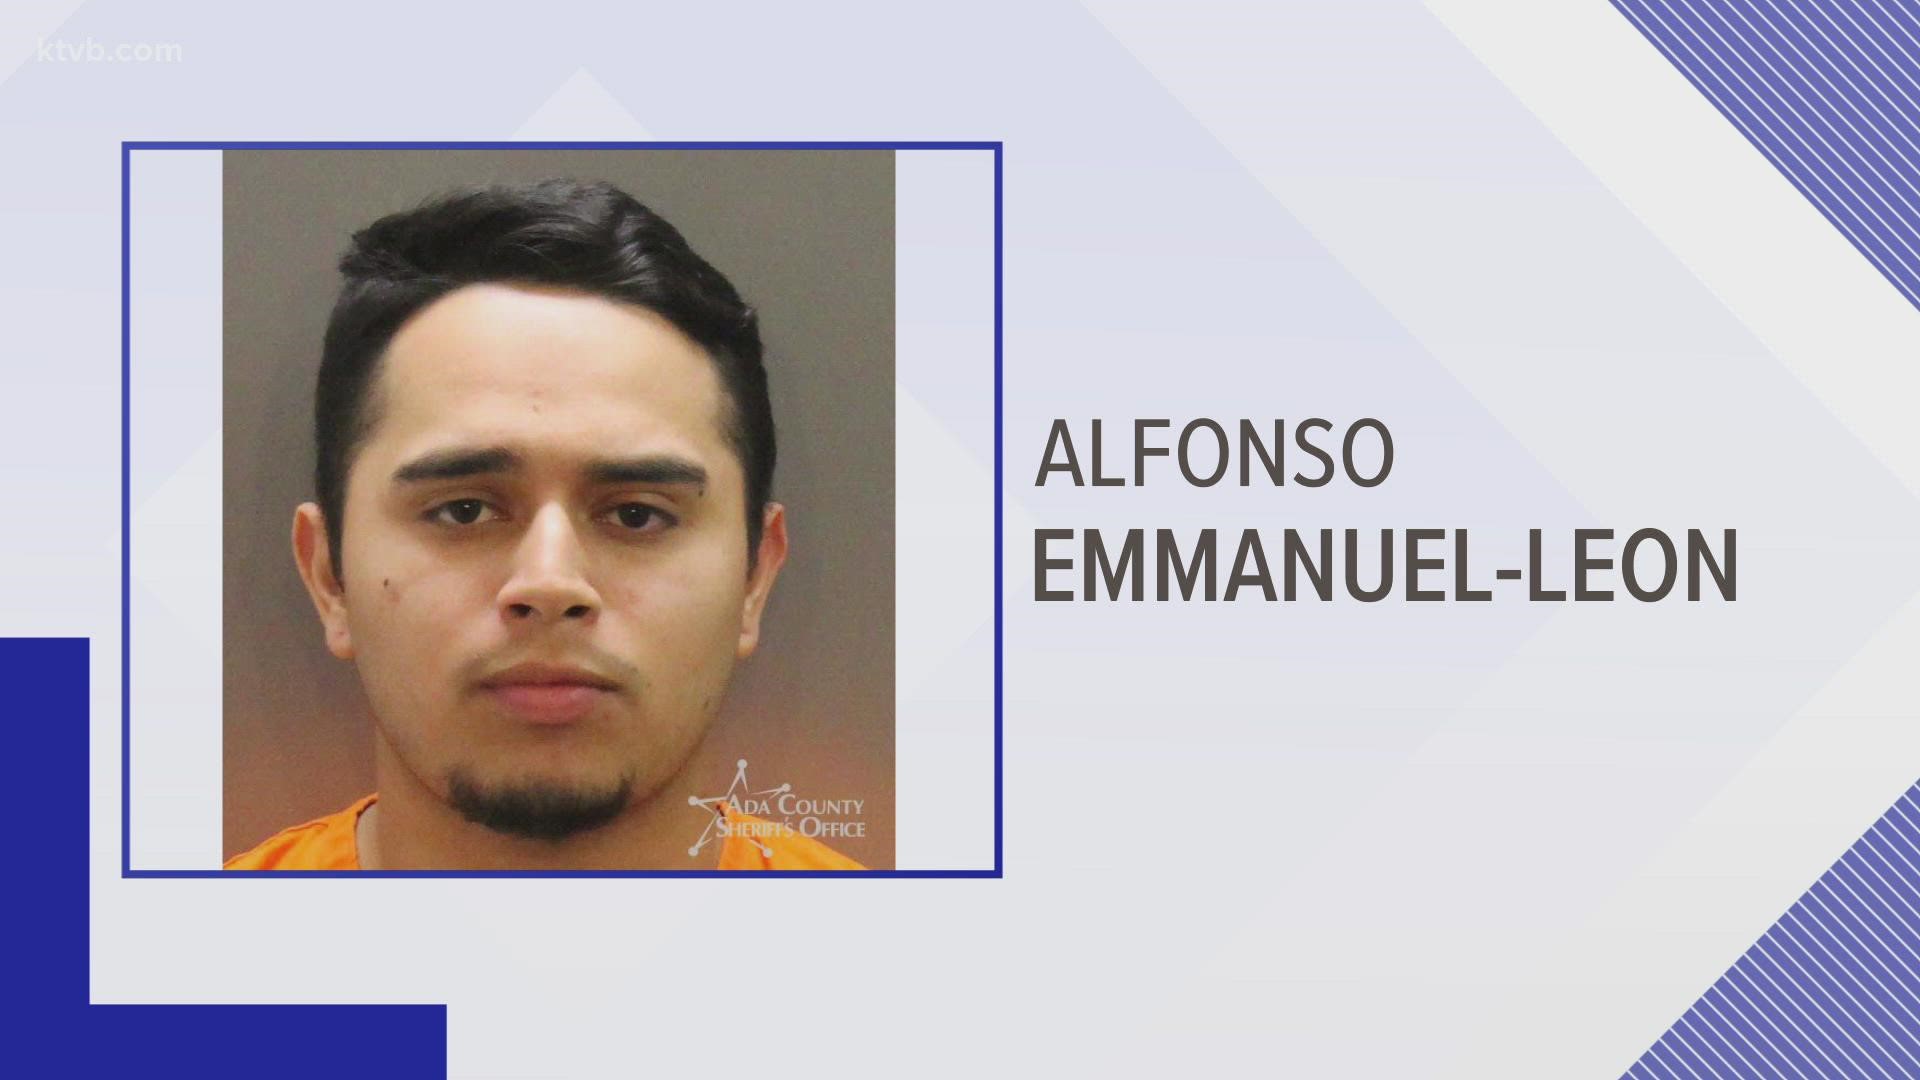 A 23-year-old man is accused of shooting and killing a woman in Nampa on Sunday.